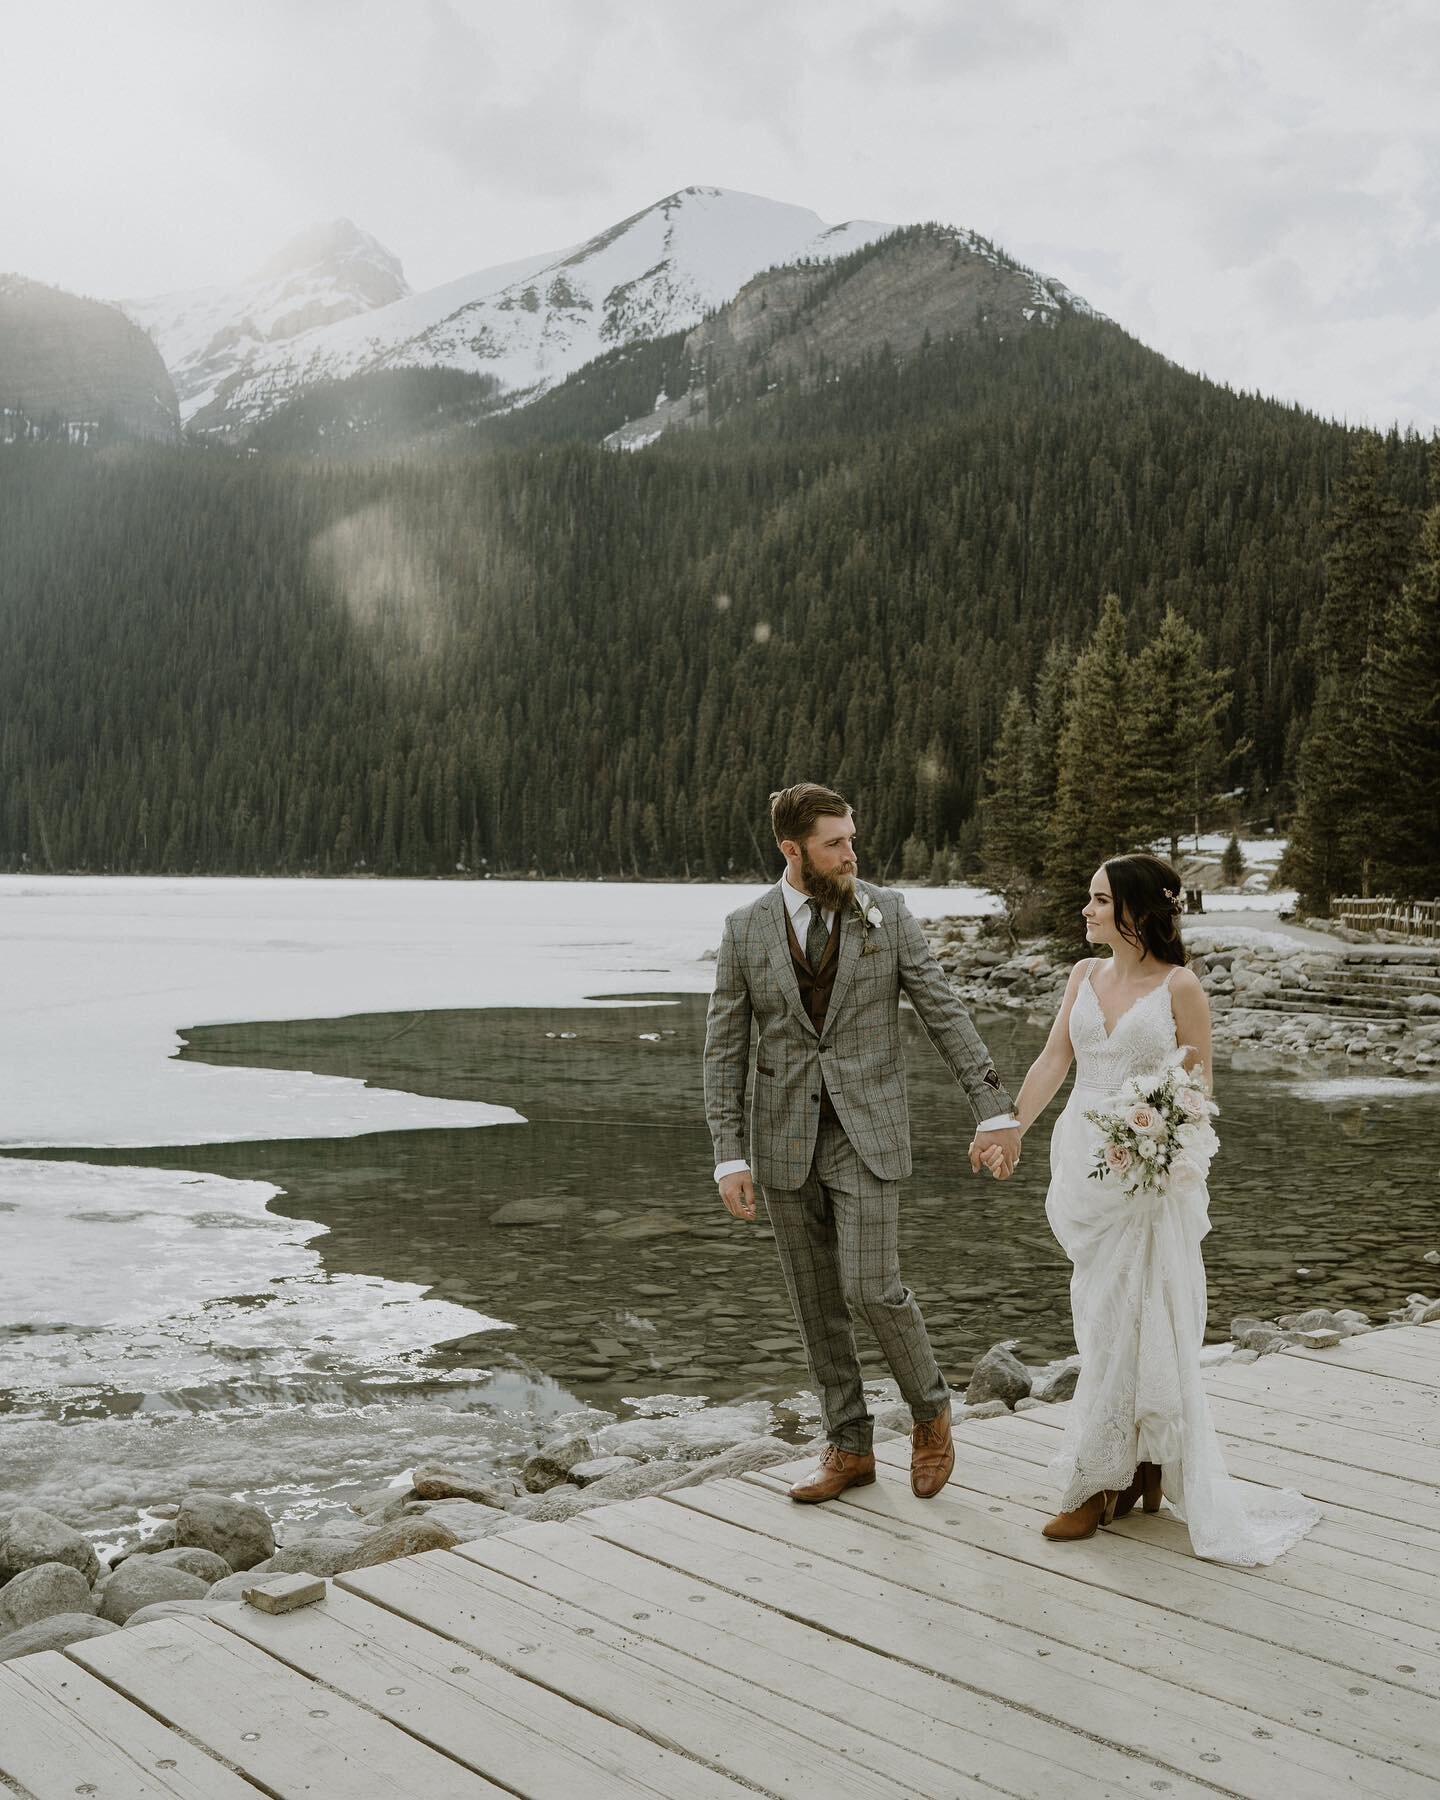 REASONS TO ELOPE:

1. JUST FOR THE TWO OF YOU
You get to take away the stress, pressure, anxiety, and obligation that comes with having a traditional wedding. No need to worry about Covid restrictions!

2. AUTHENTIC TO YOU
Eloping means your wedding 